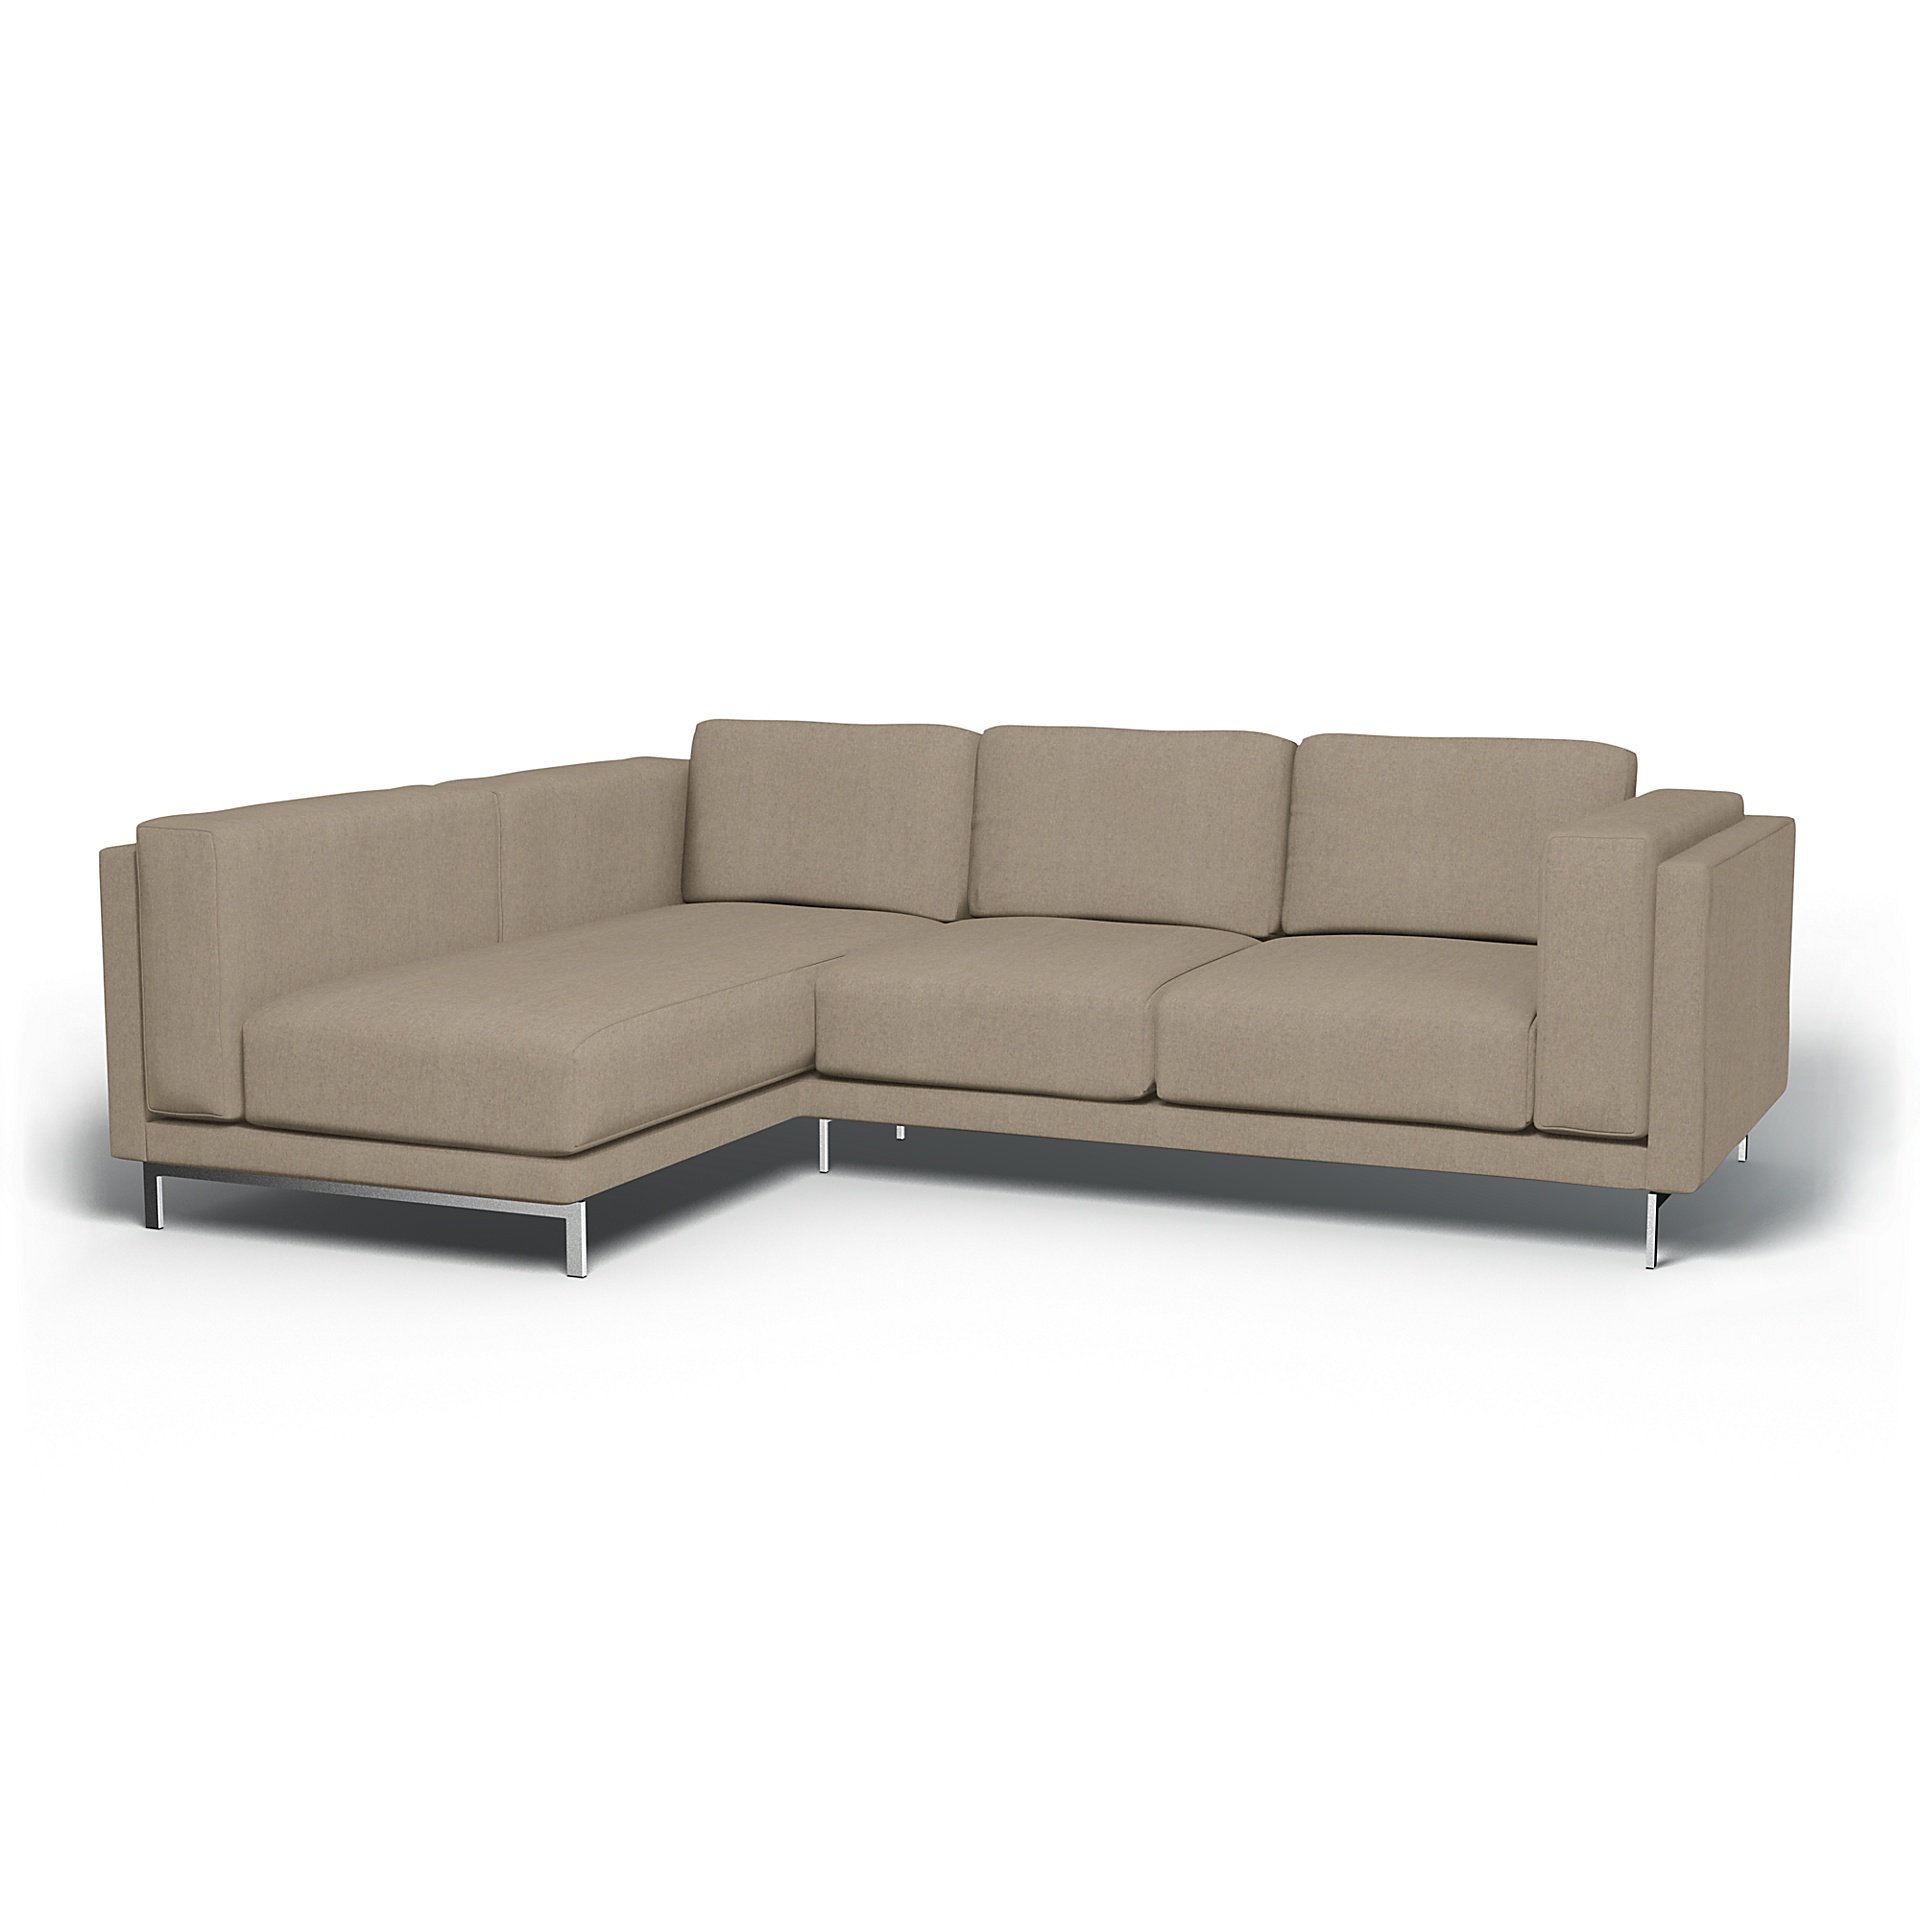 IKEA - Nockeby 3 Seater Sofa with Left Chaise Cover, Birch, Wool - Bemz